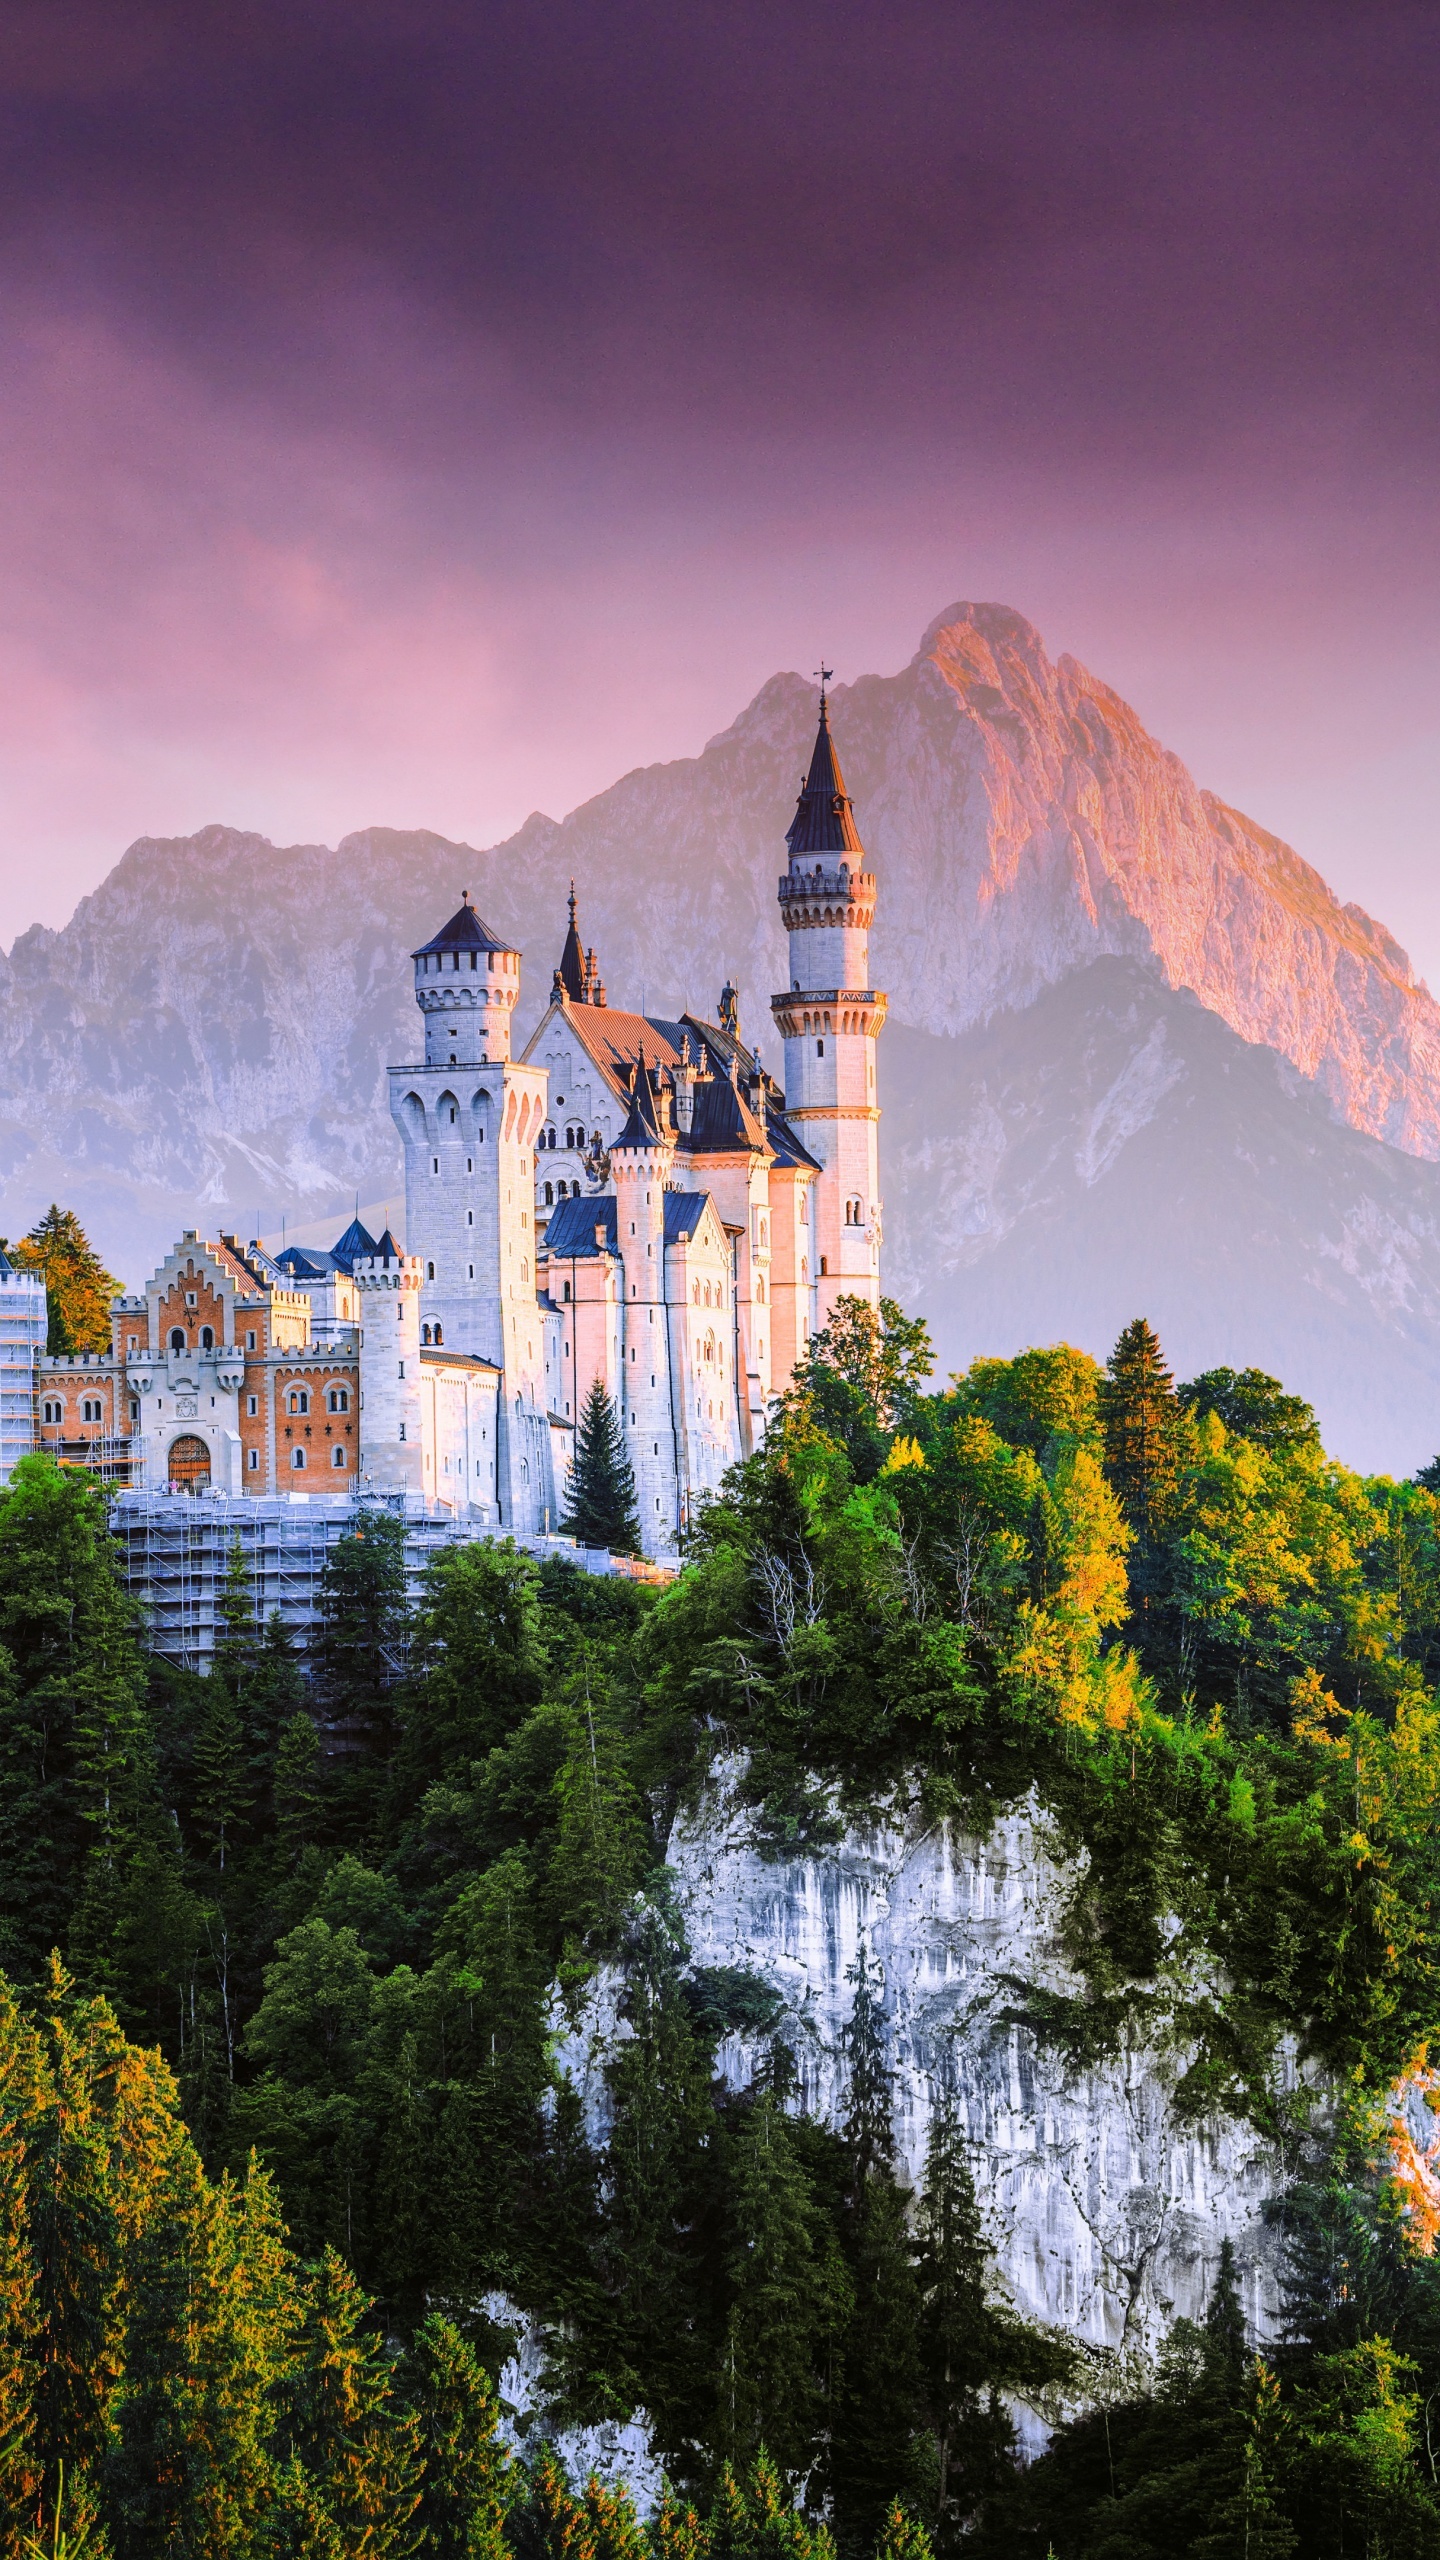 Castle: Schloss Neuschwanstein, situated at the edge of the alps next to the town of Füssen, Ancient architecture. 1440x2560 HD Wallpaper.